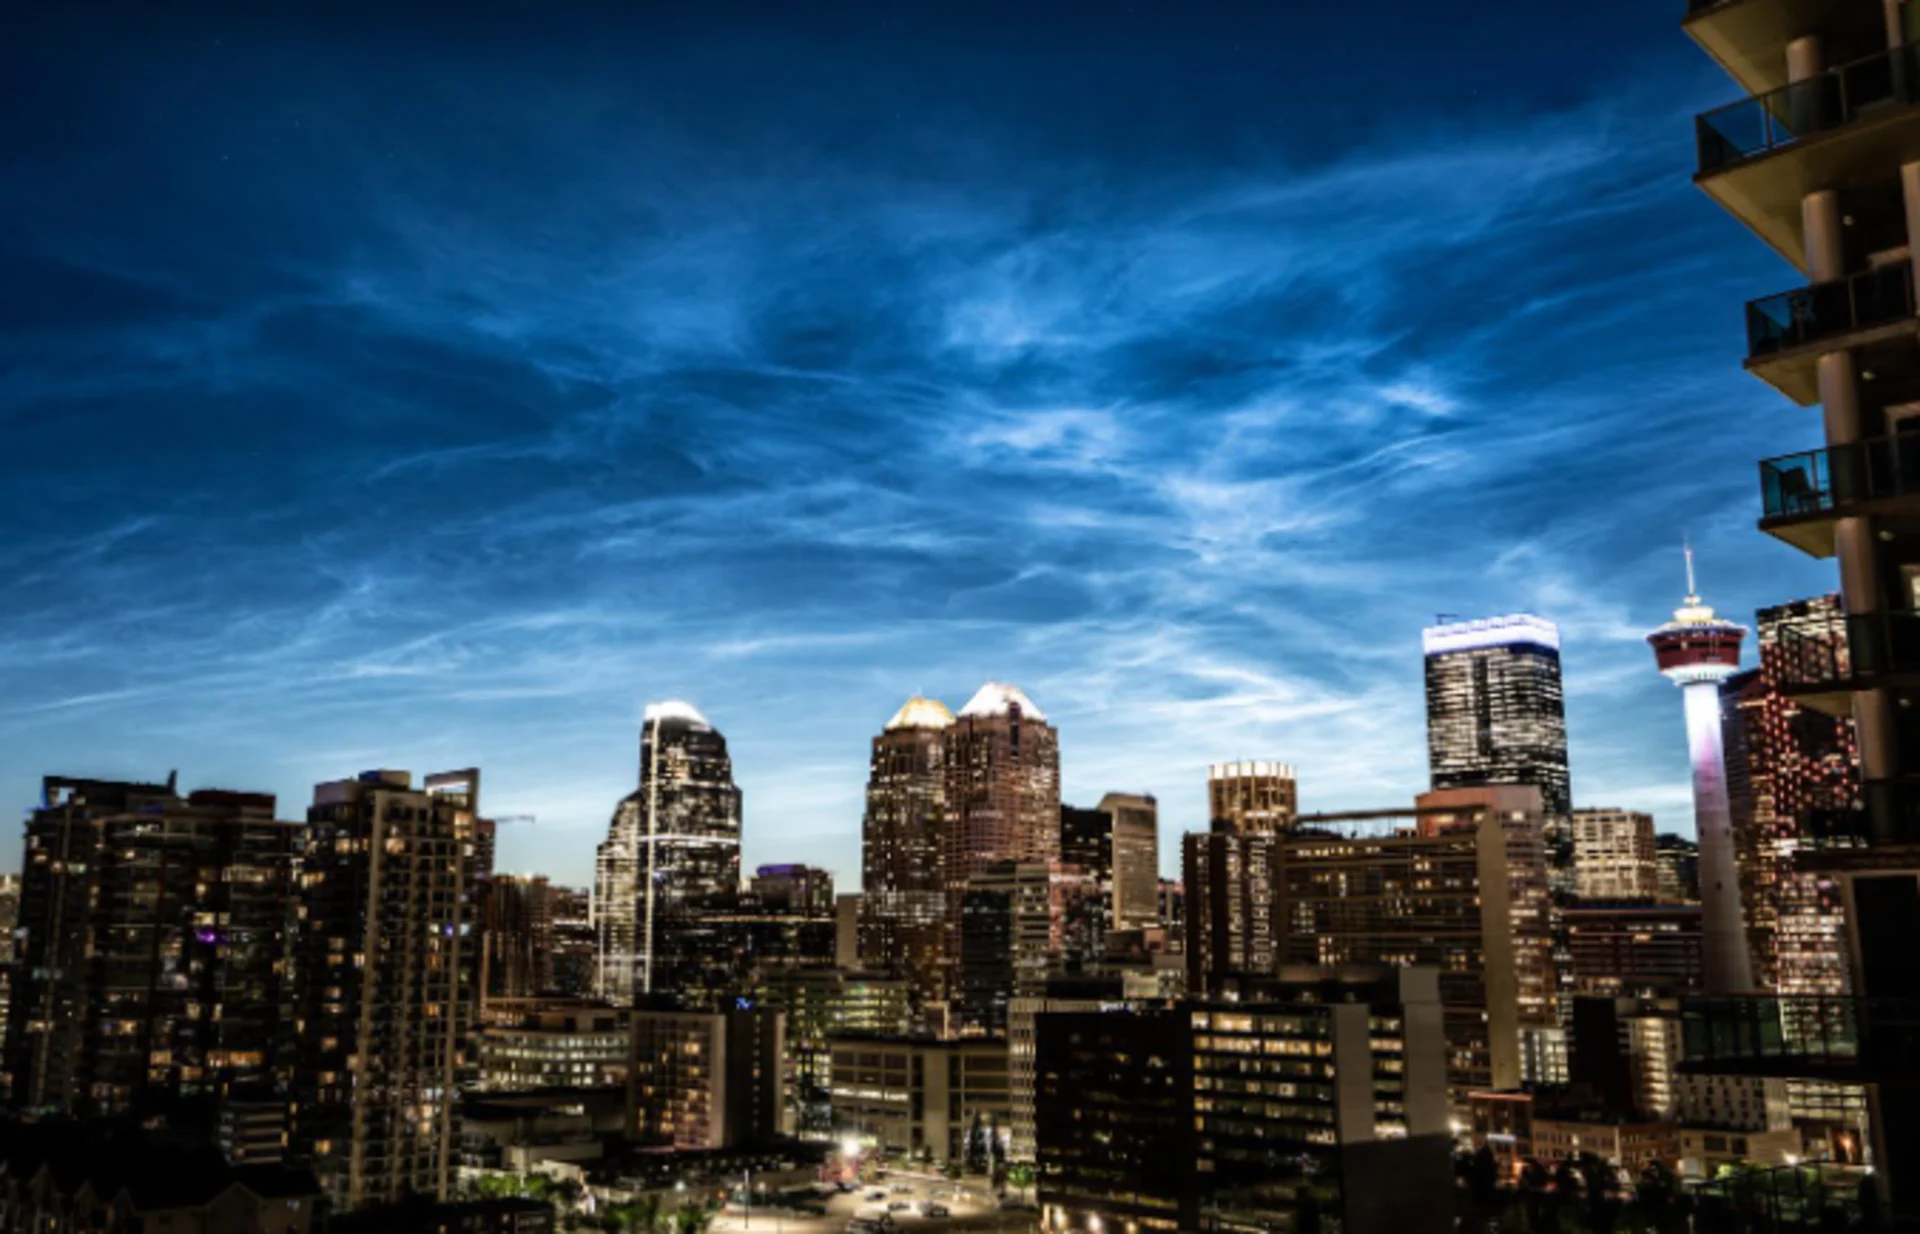 Coldest and highest clouds "on" Earth light up Calgary's night